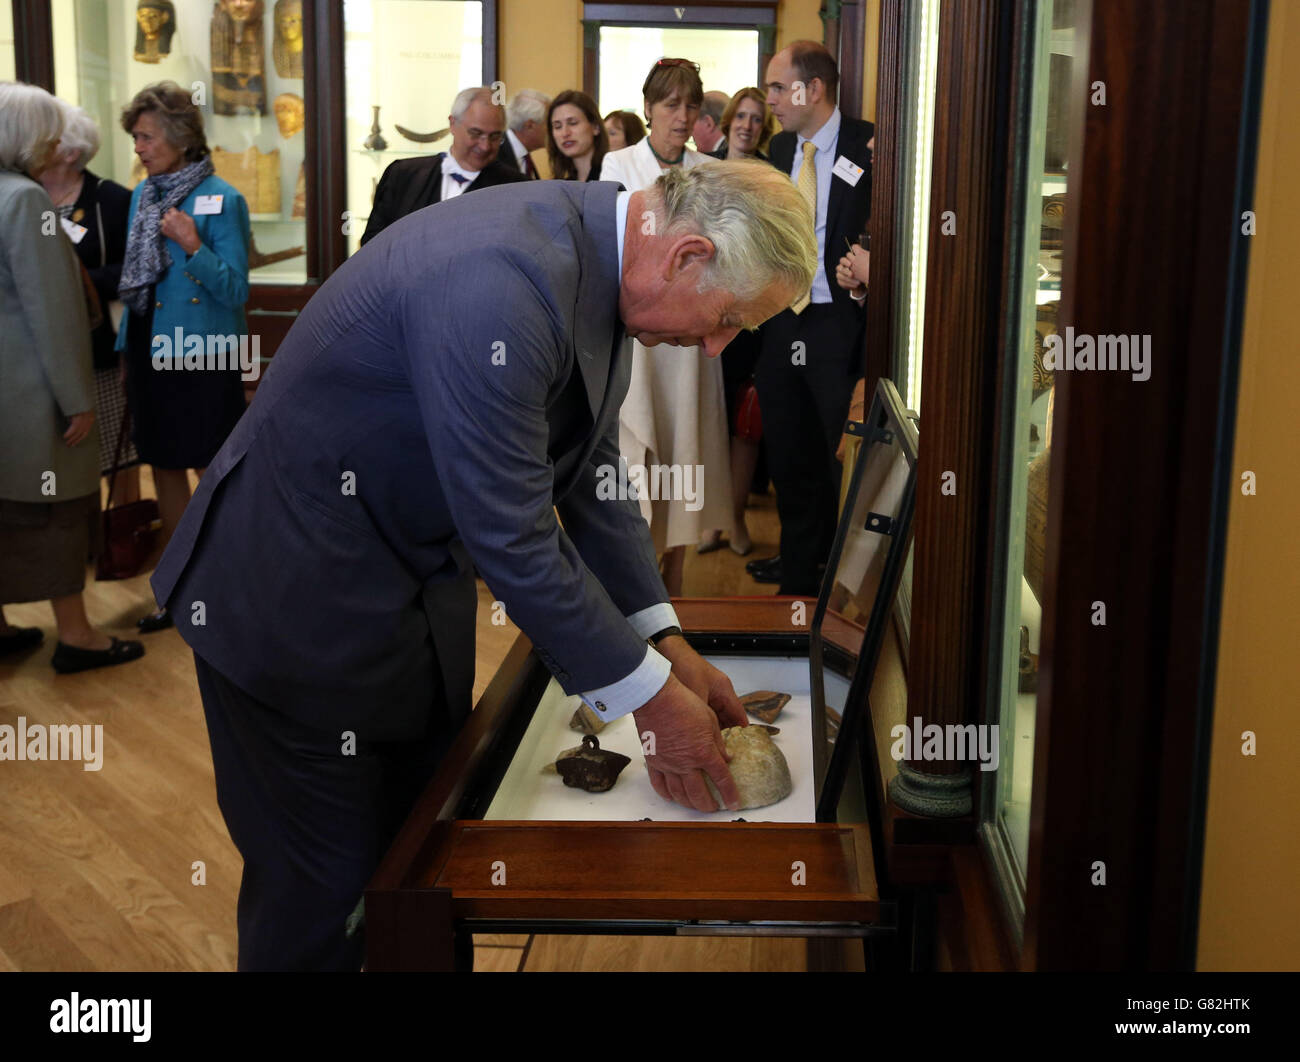 The Prince of Wales places an historic artifact of a marble head of a young man from a Greek relief, which dates from late fifth to early fourth century BC, into a display cabinet during a visit to Eton College near Windsor, Berkshire where he officially opened the new Bekynton Field Development building. Stock Photo